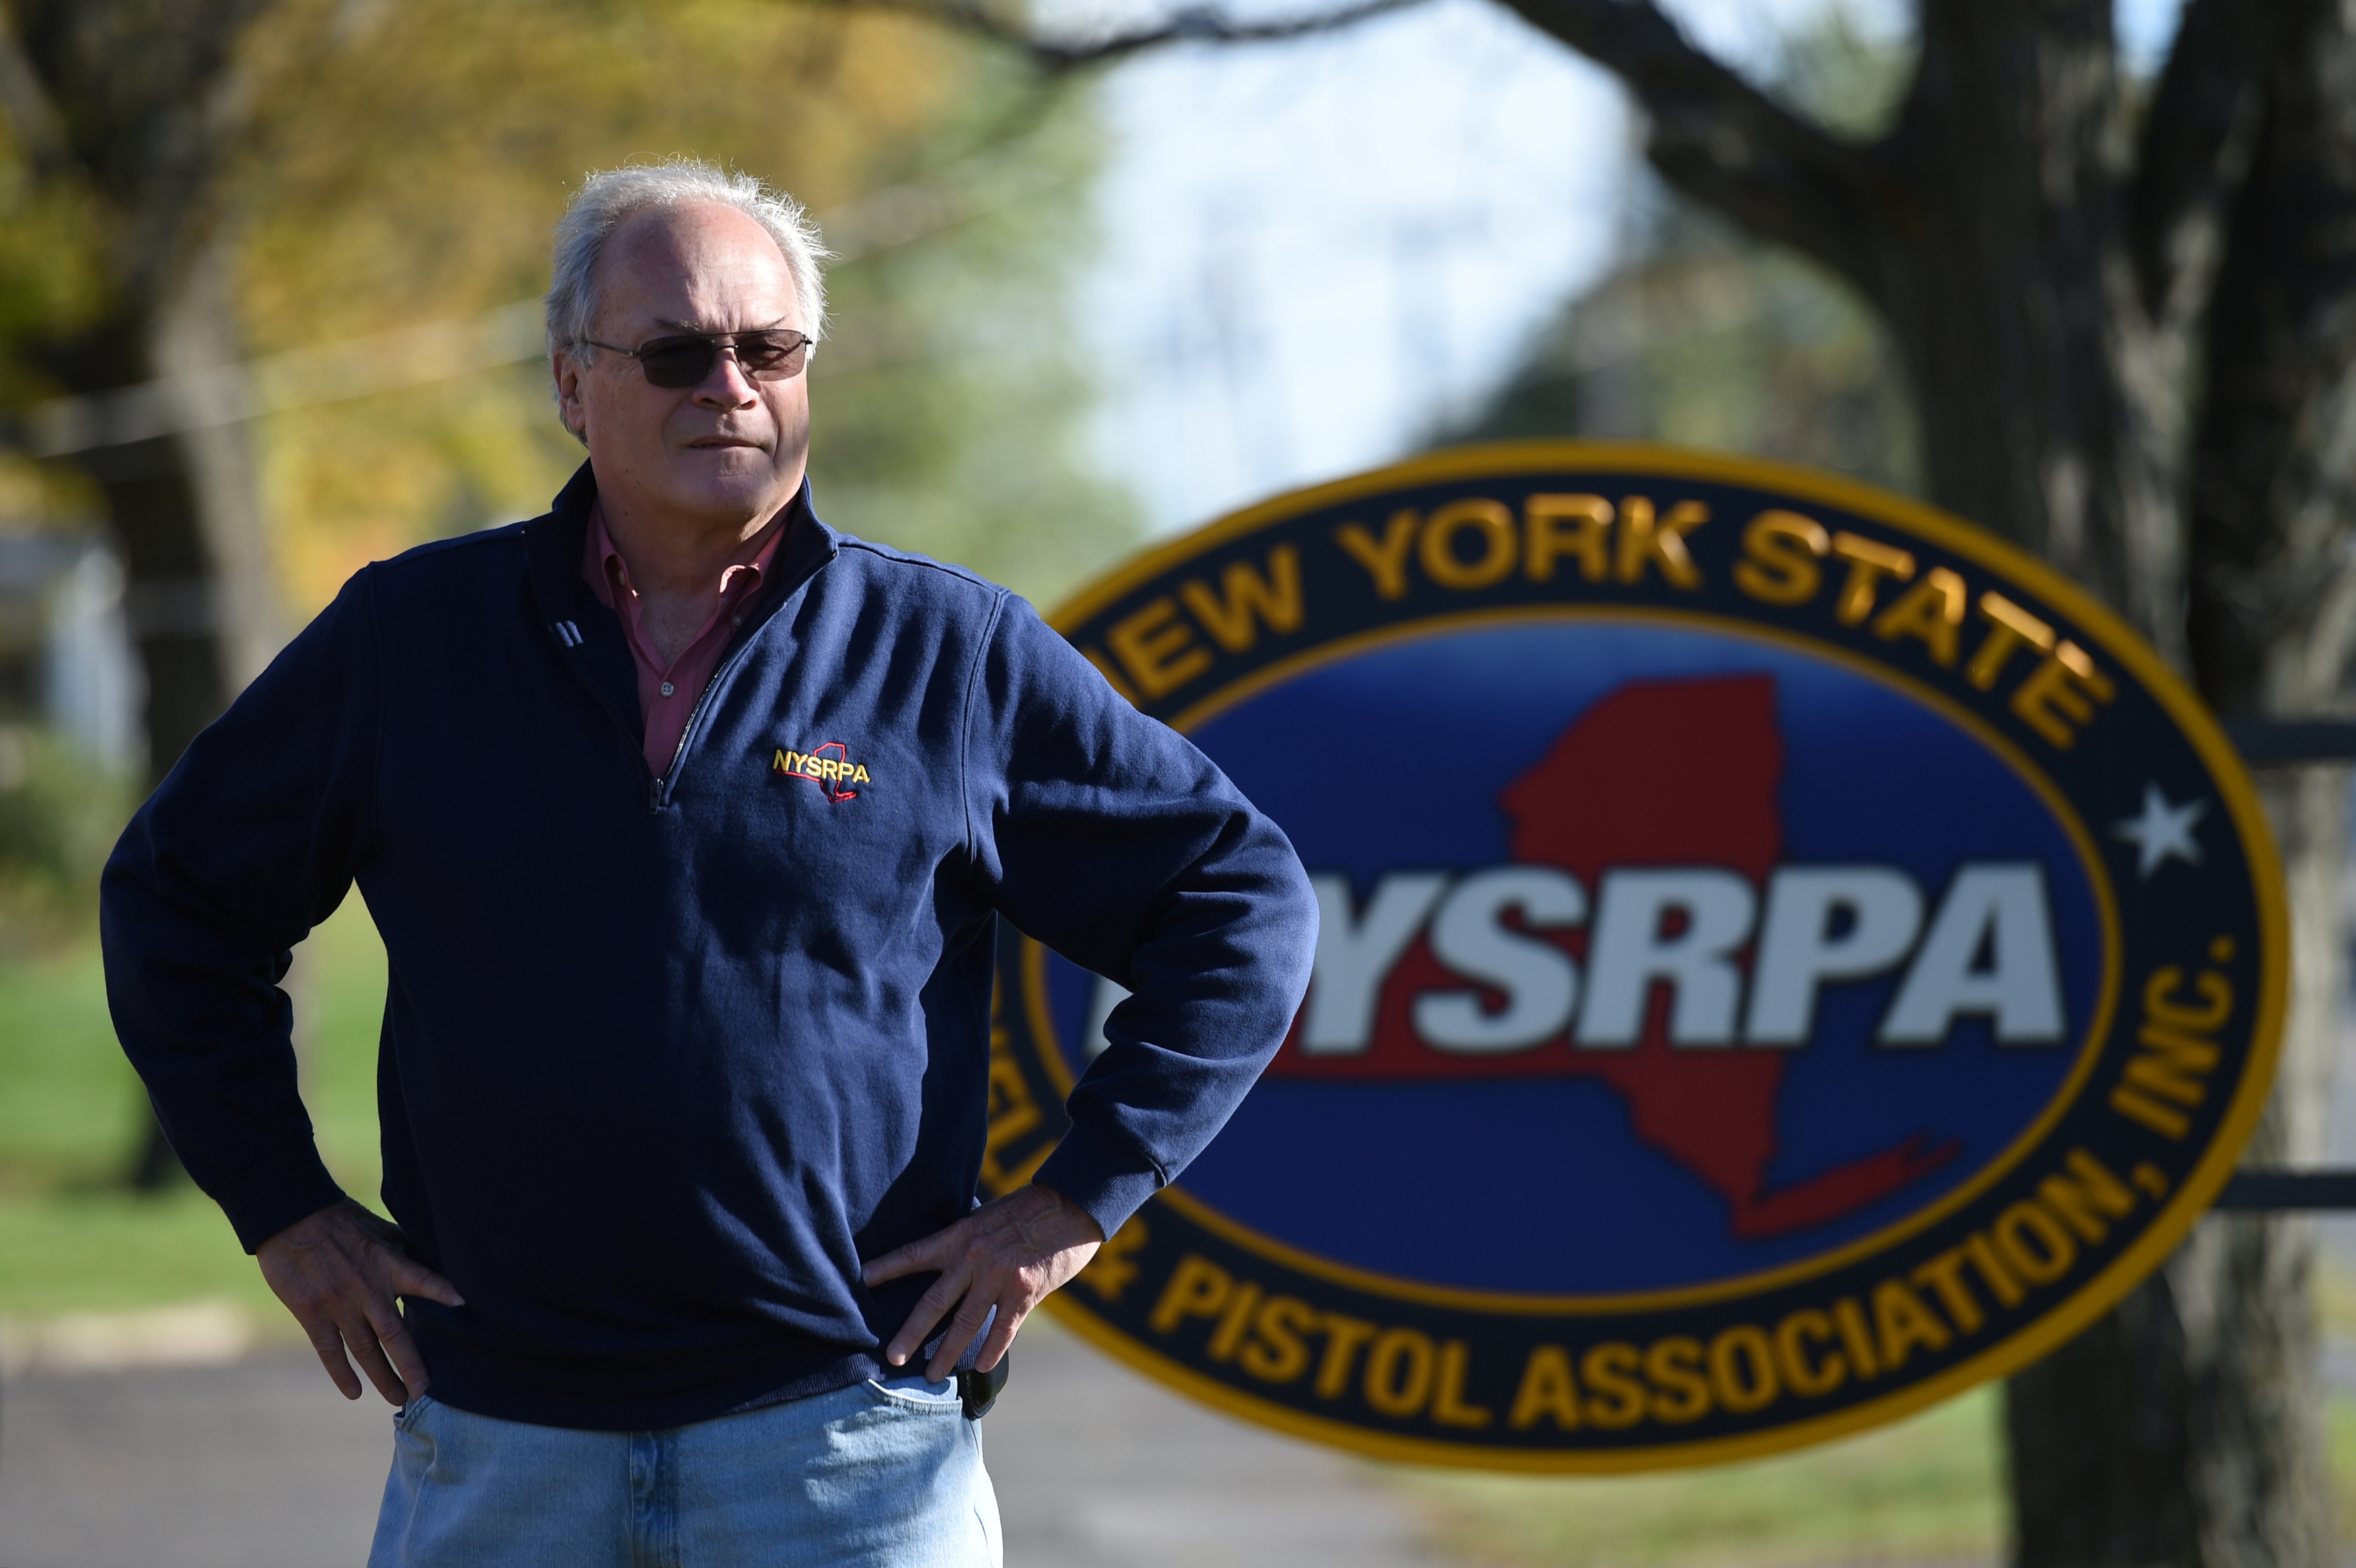 Tom King, head of the New York State Rifle and Pistol Association (NYSRPA) and a challenger in a case being heard by the U.S. Supreme Court with regards to the right to carry handguns in public, poses at the NYSRPA office in East Greenbush, New York, U.S. October 20, 2021. REUTERS/Cindy Schultz